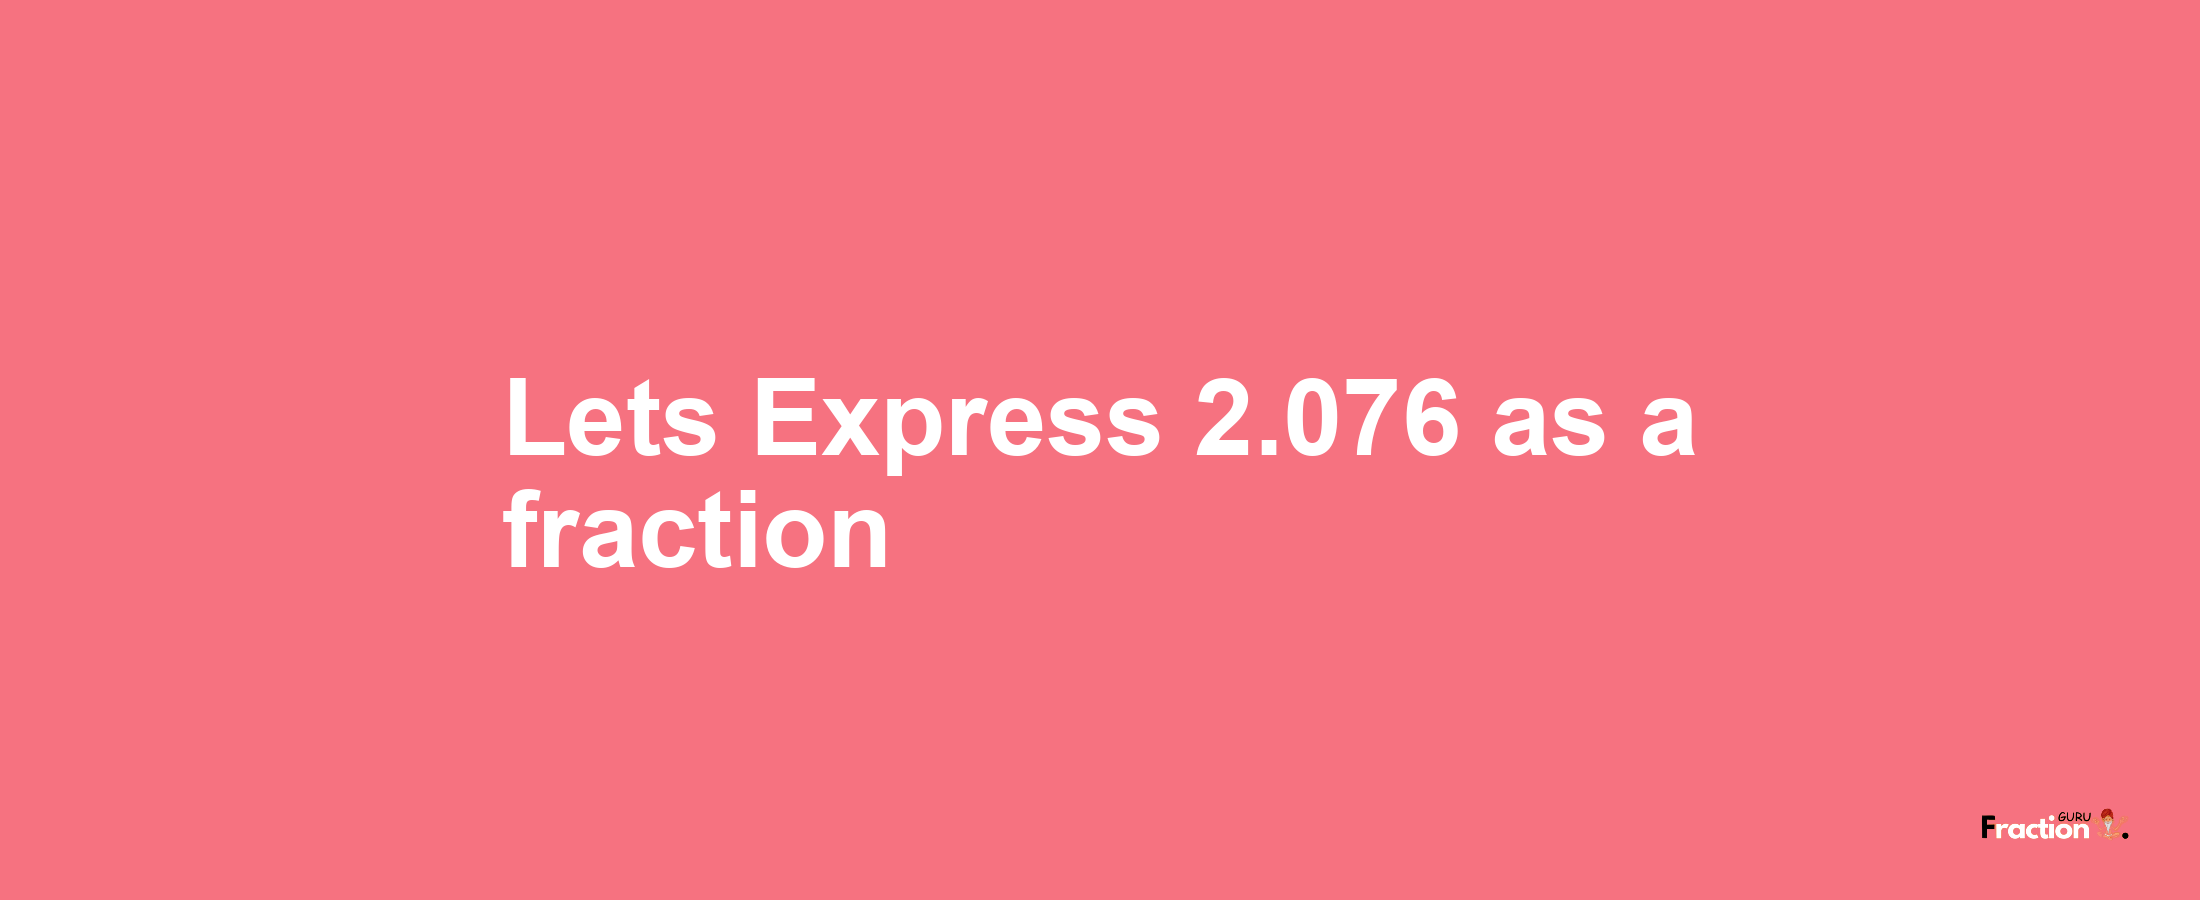 Lets Express 2.076 as afraction